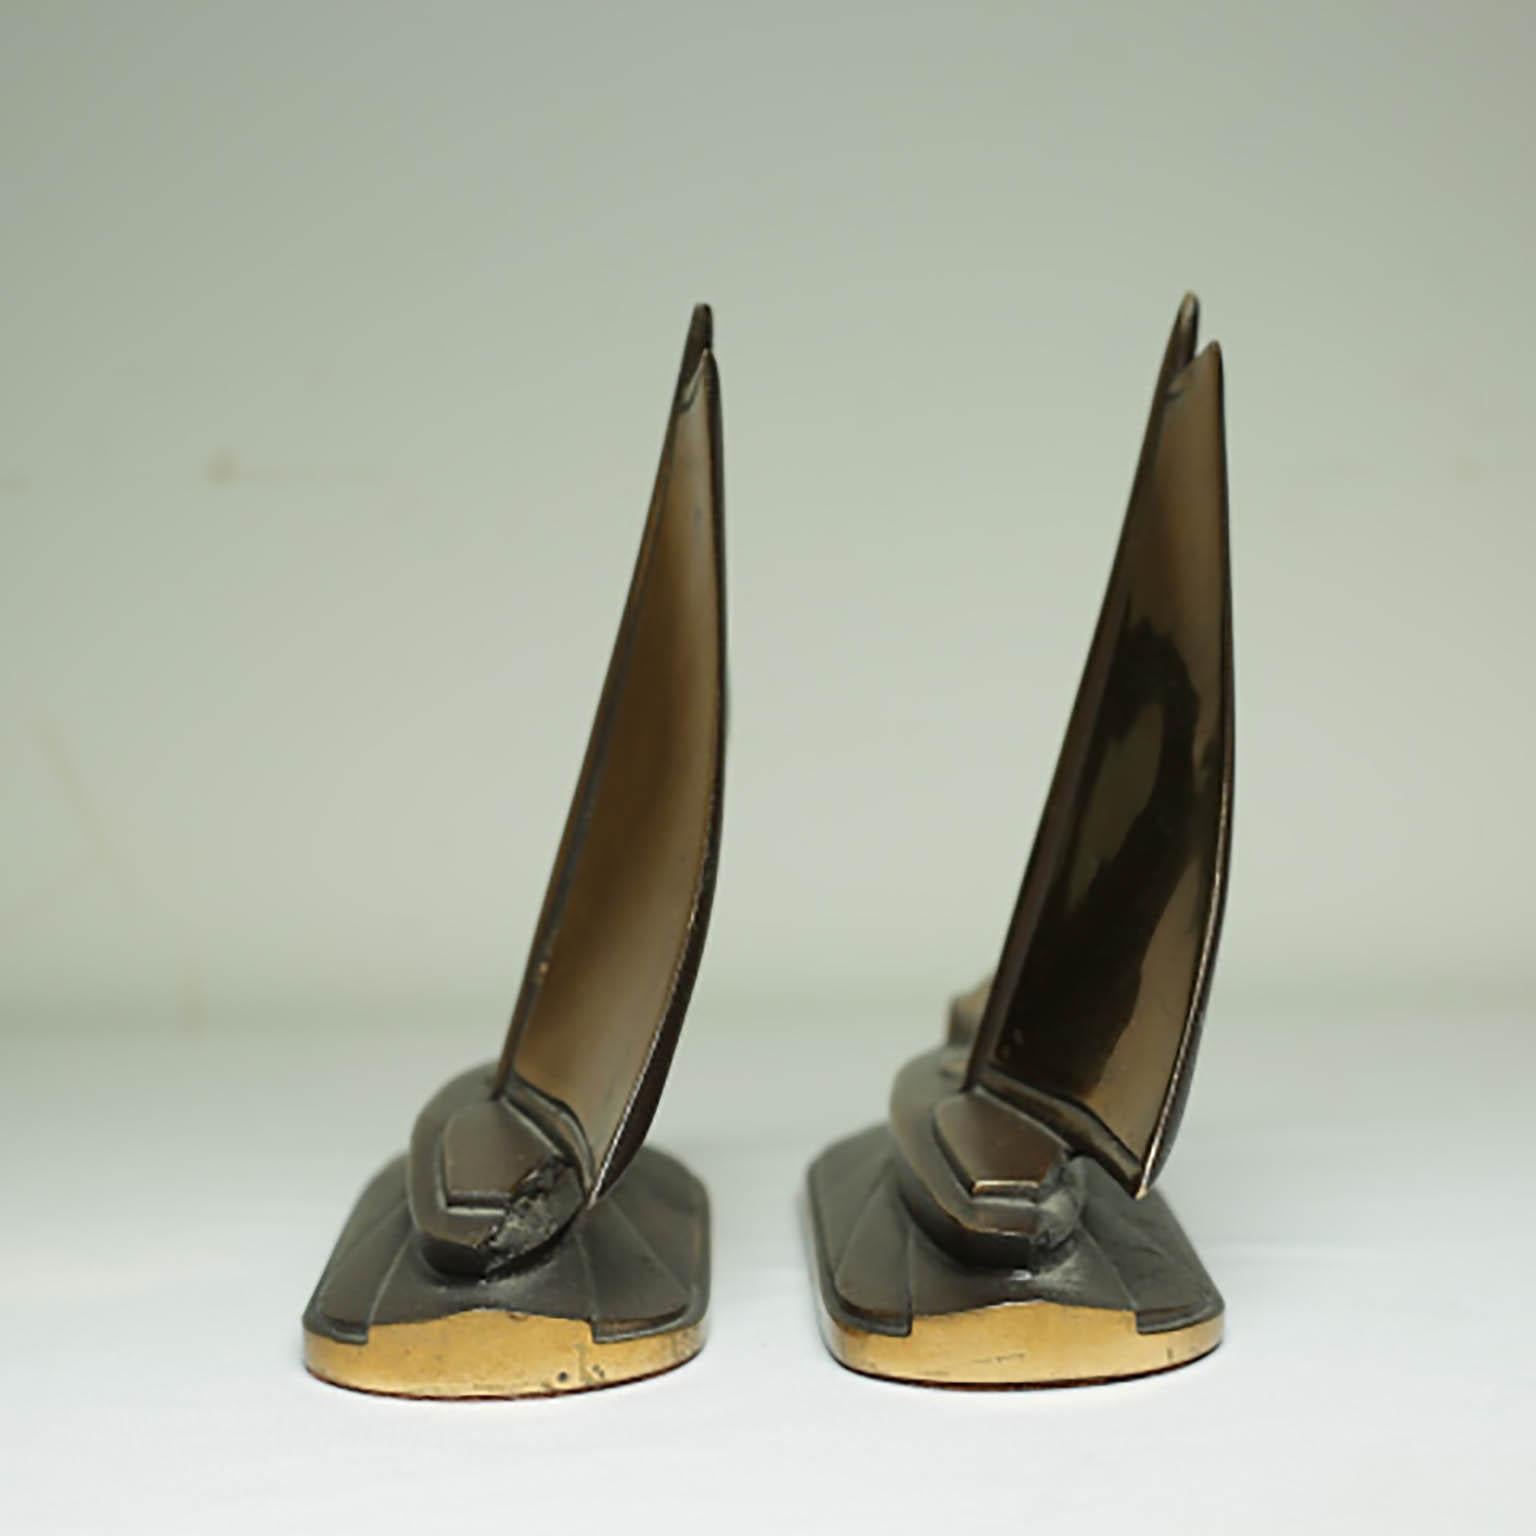 ABOUT

This is an original pair of bronze and copper bookends. The main body is bronze with copper finish on the sails and around the base. Both pieces retain the original felt on the bottom. The bookends have retained their original copper and